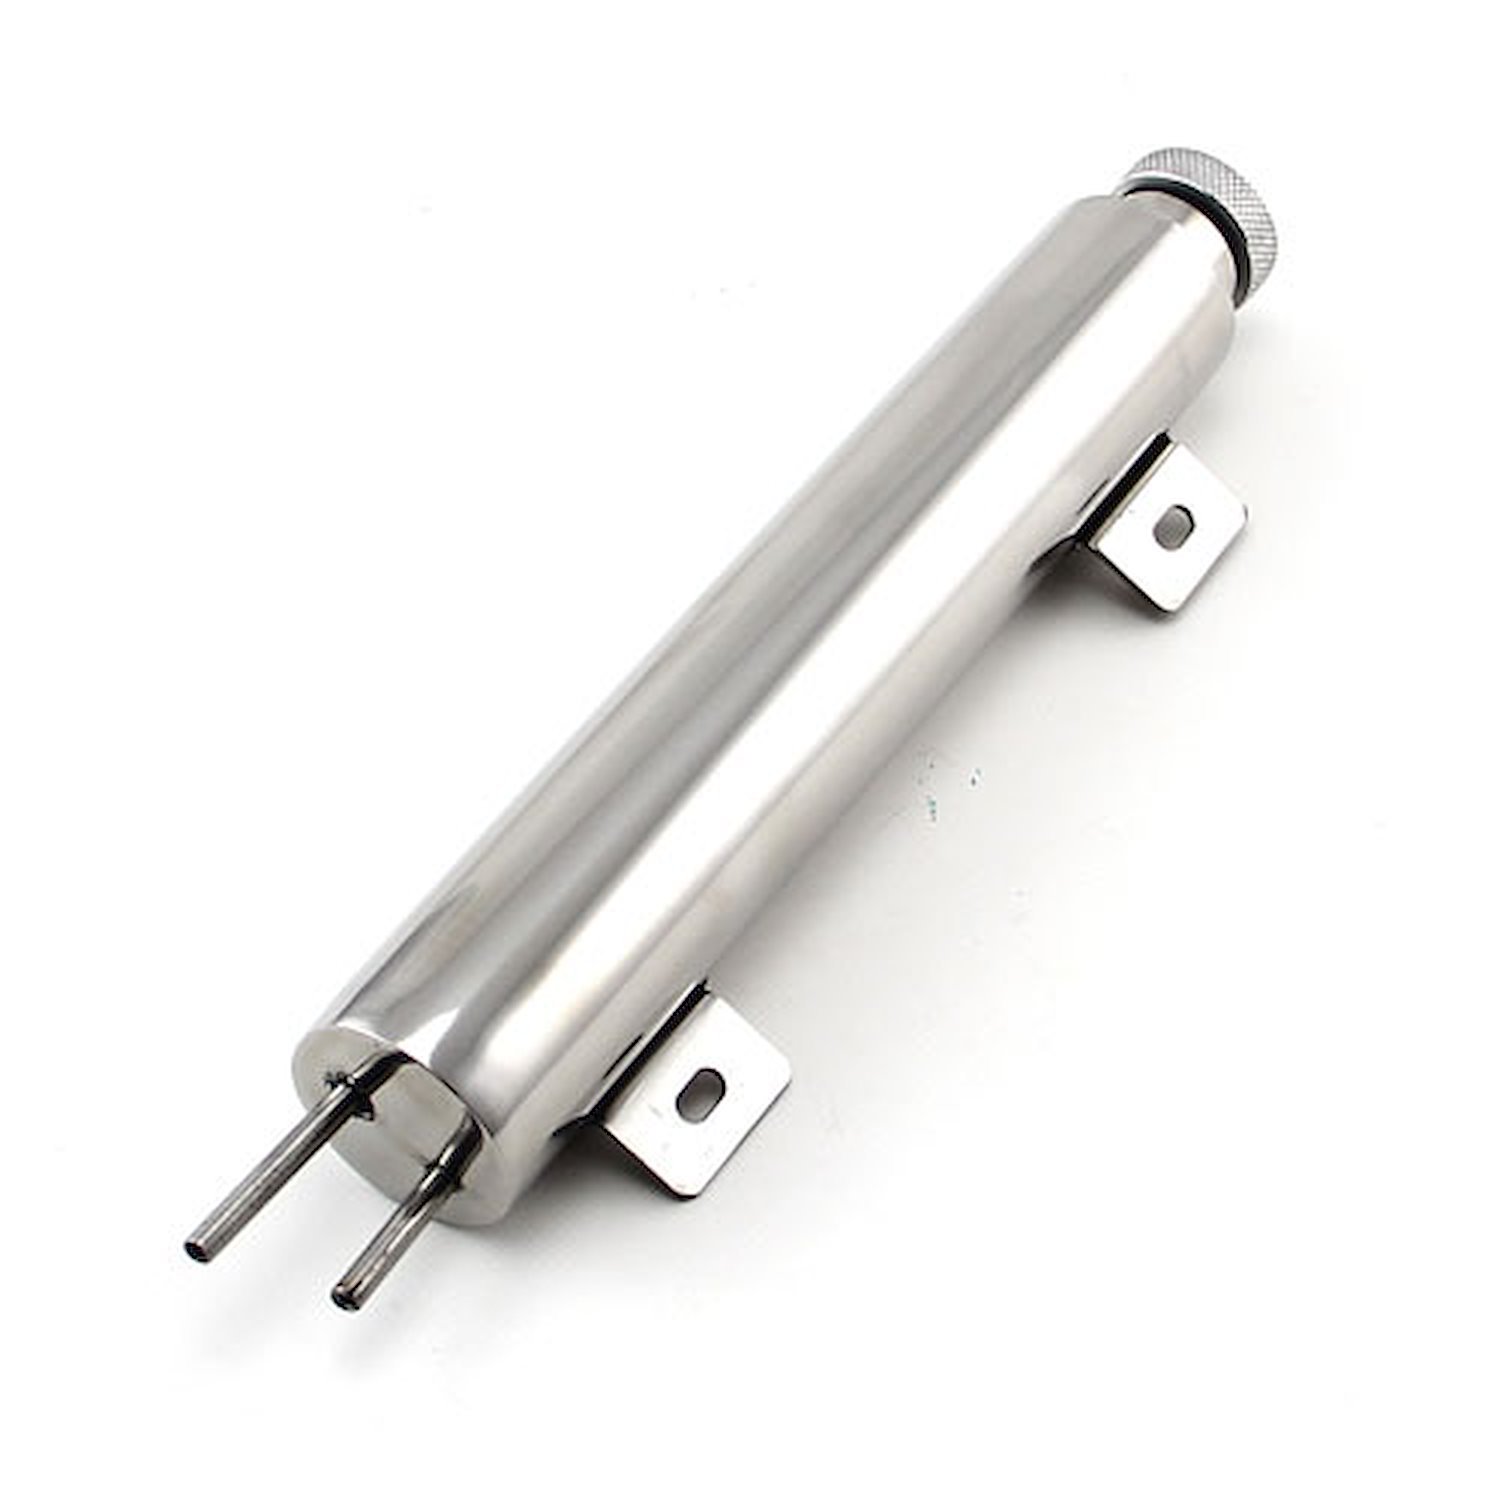 2 x 17 Stainless Steel Overflow Tank With Mounting Bracket Kit